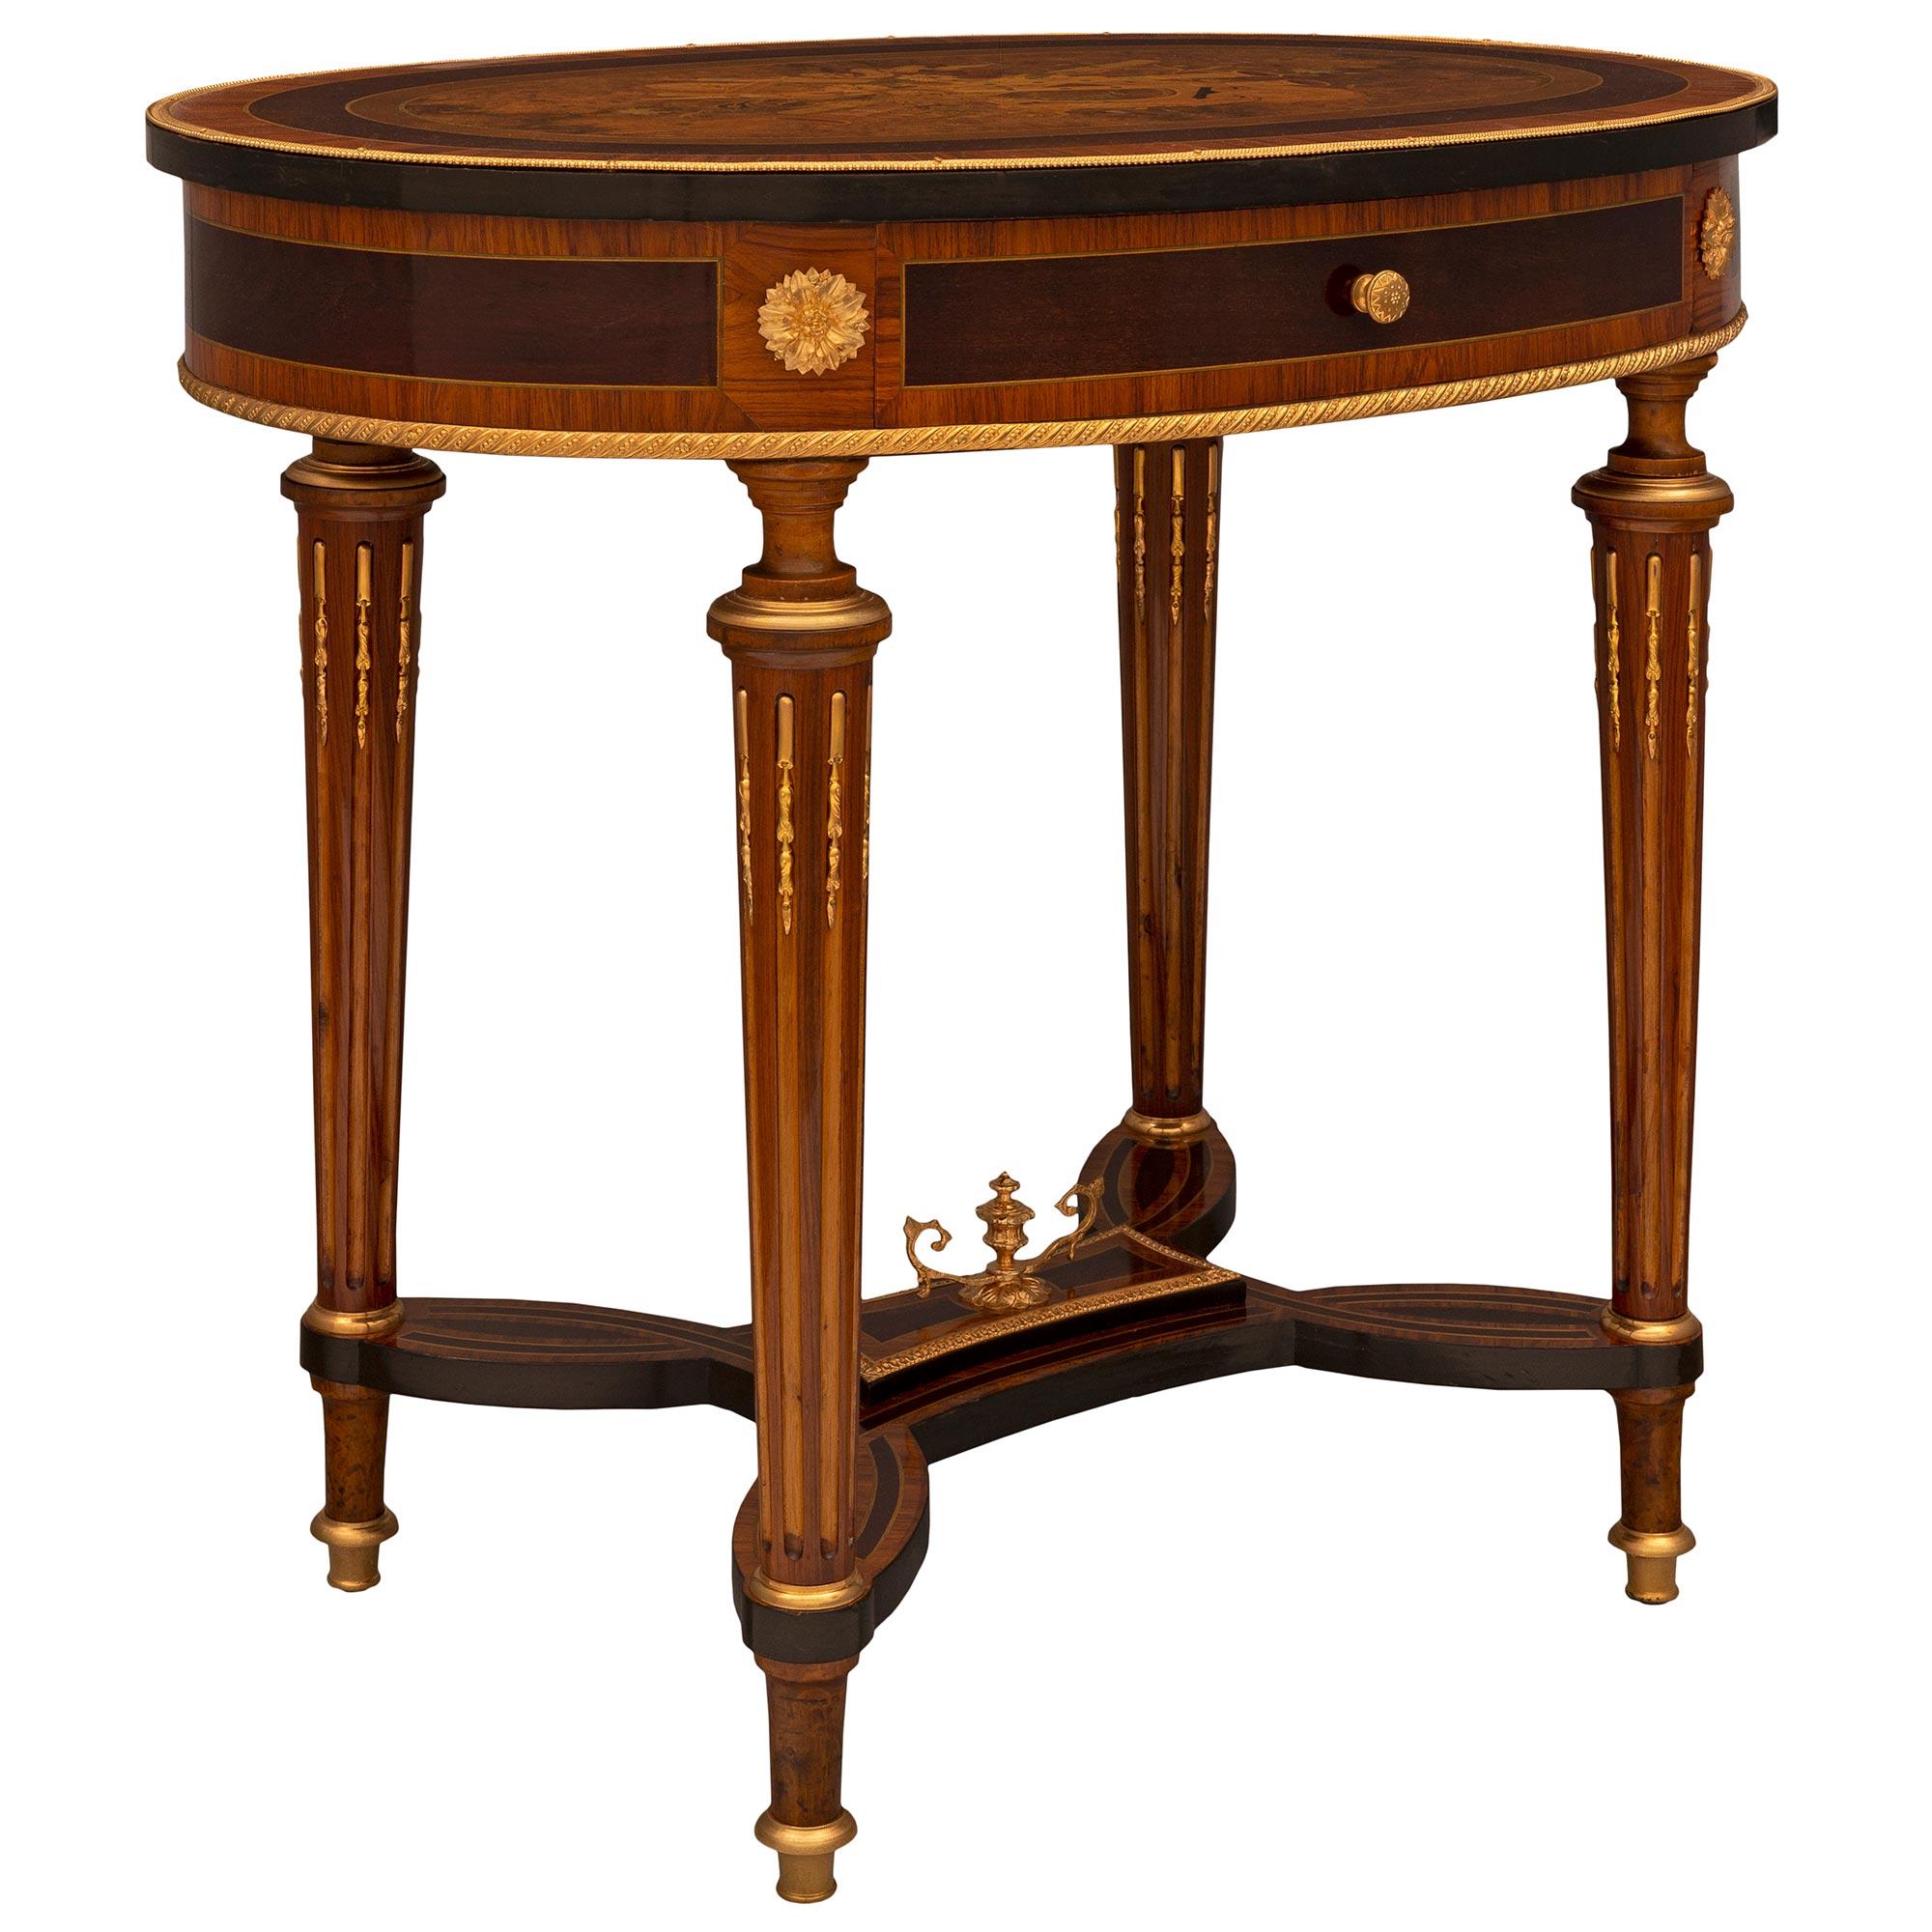 French 19th Century Louis XVI Style Marquetry Top Table with One Drawer In Good Condition For Sale In West Palm Beach, FL